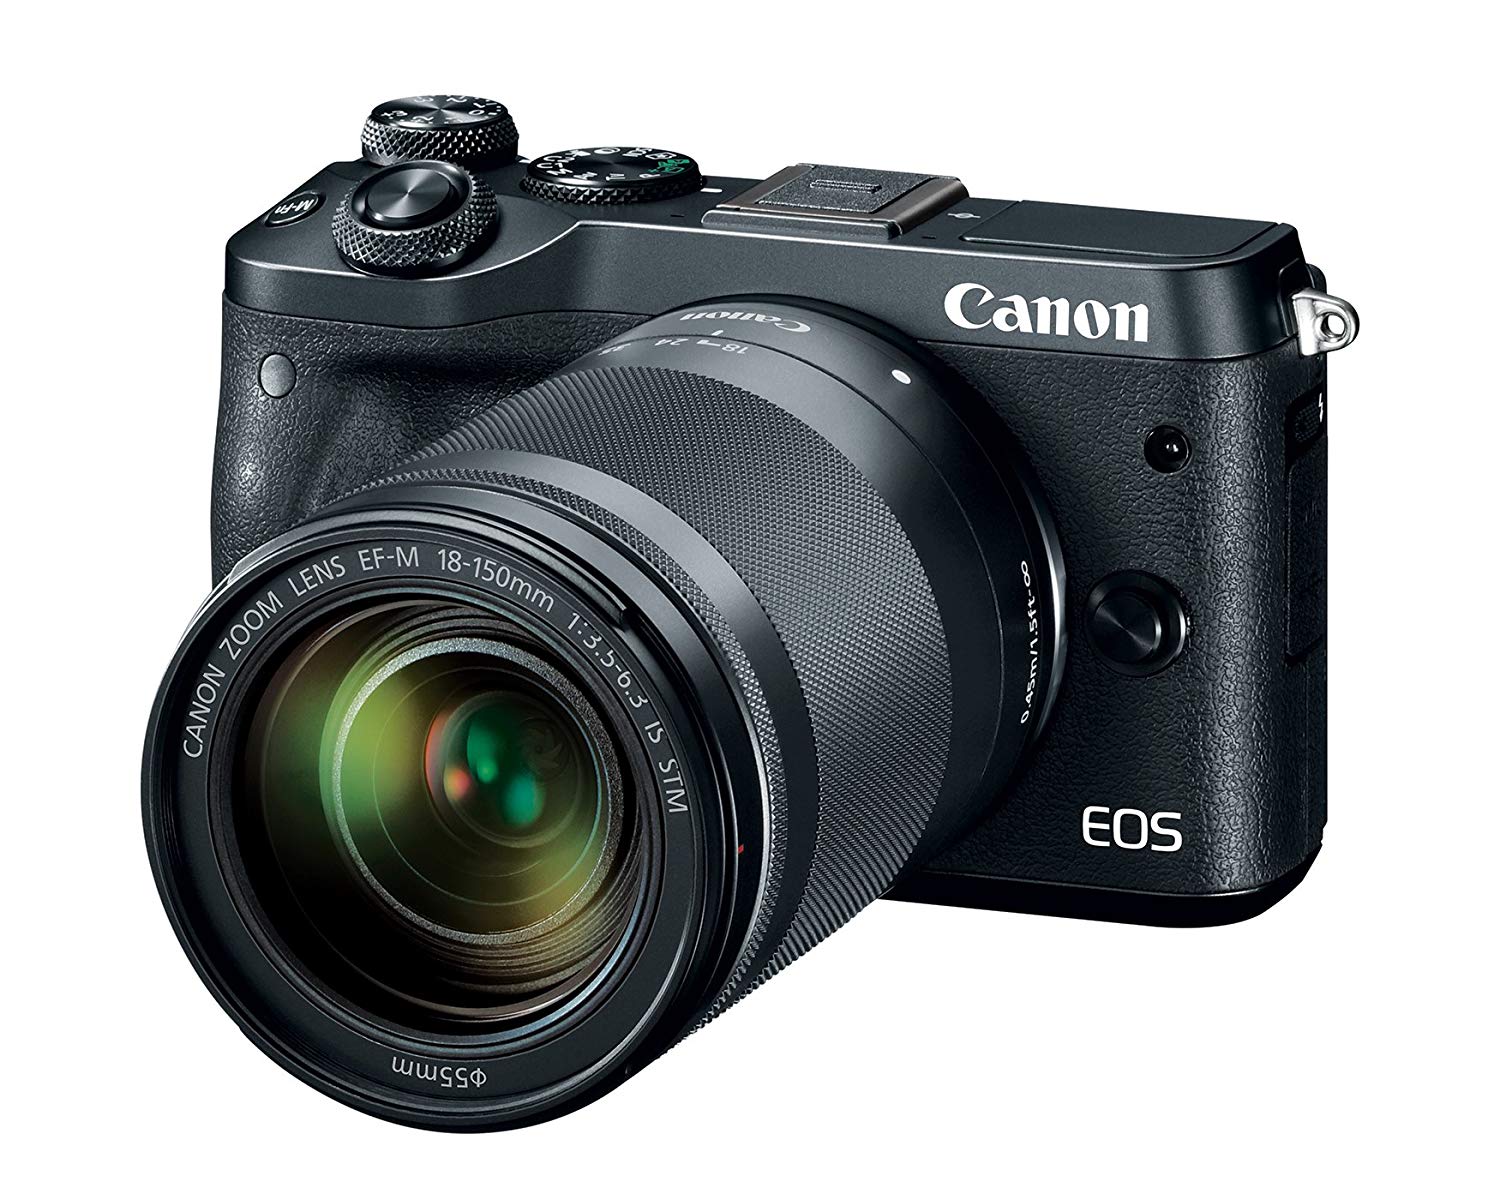 Canon EOS M6 (أسود) 18-150 مم f / 3.5-6.3 IS STM Kit